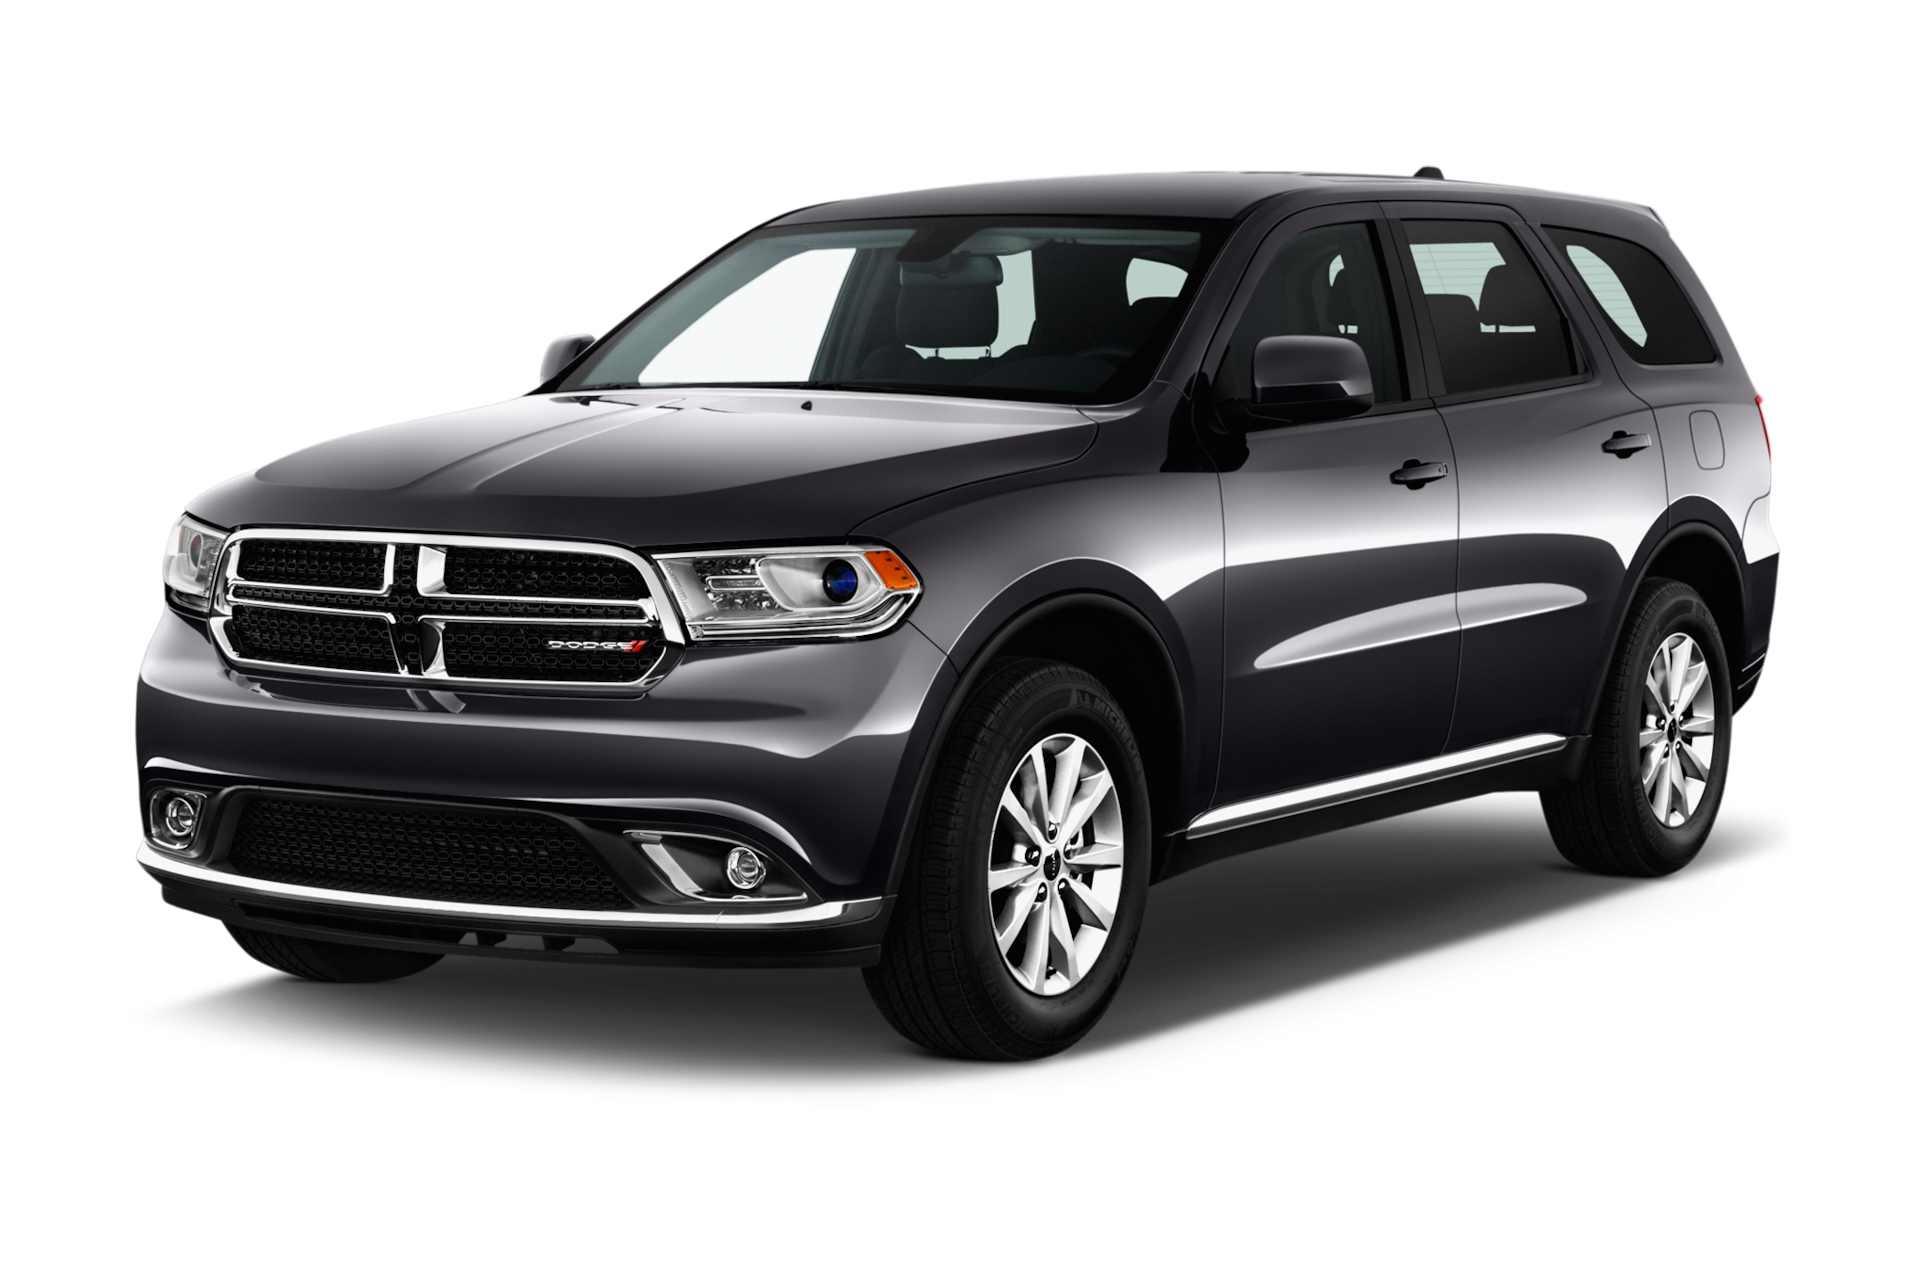 2015 Dodge Durango Prices, Reviews, and Photos - MotorTrend